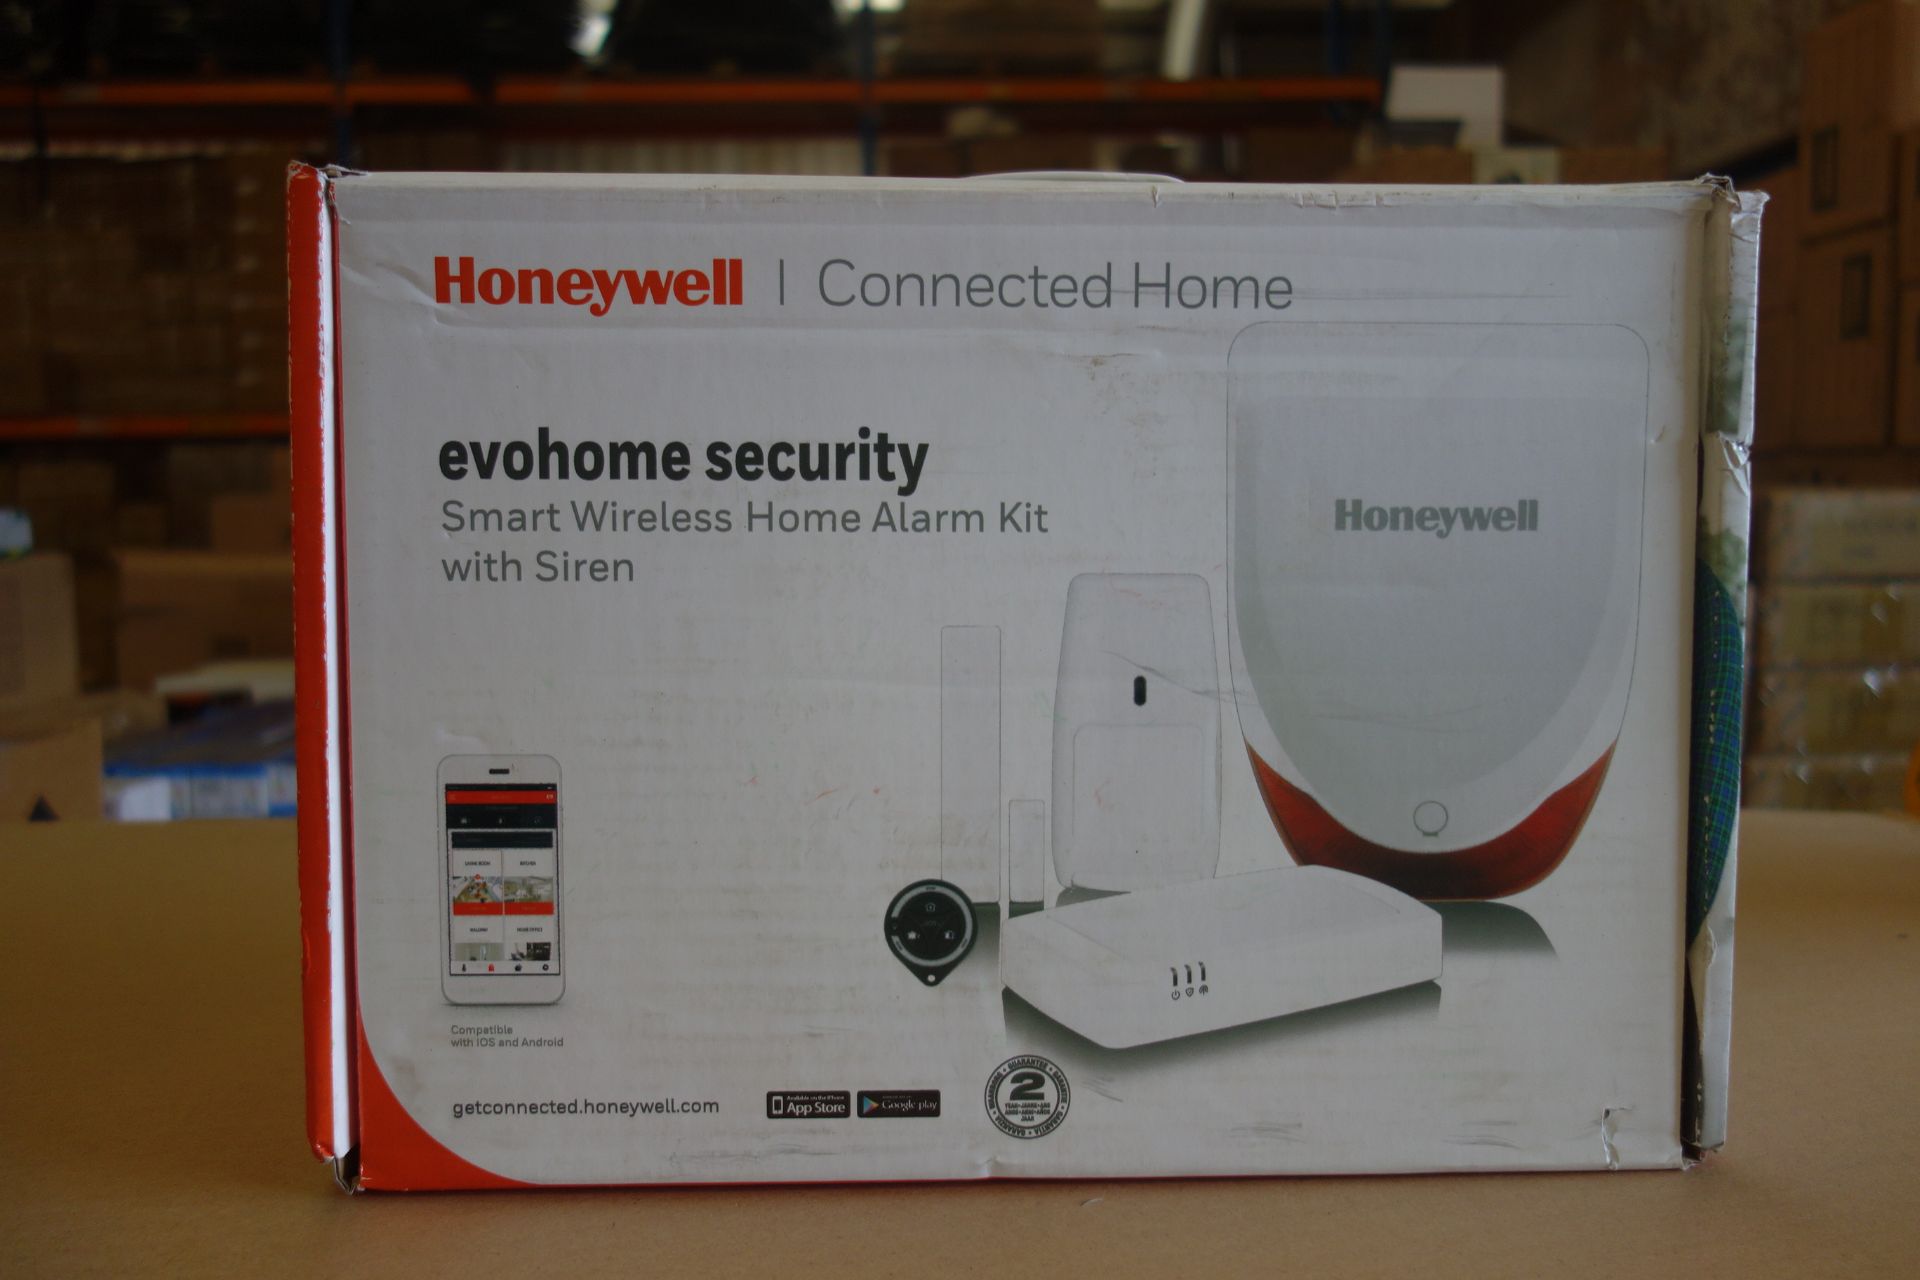 1 X Honeywell HS9135 EvoHome Security Smart Wireless Home Alarm Kit With Siren Download The App +